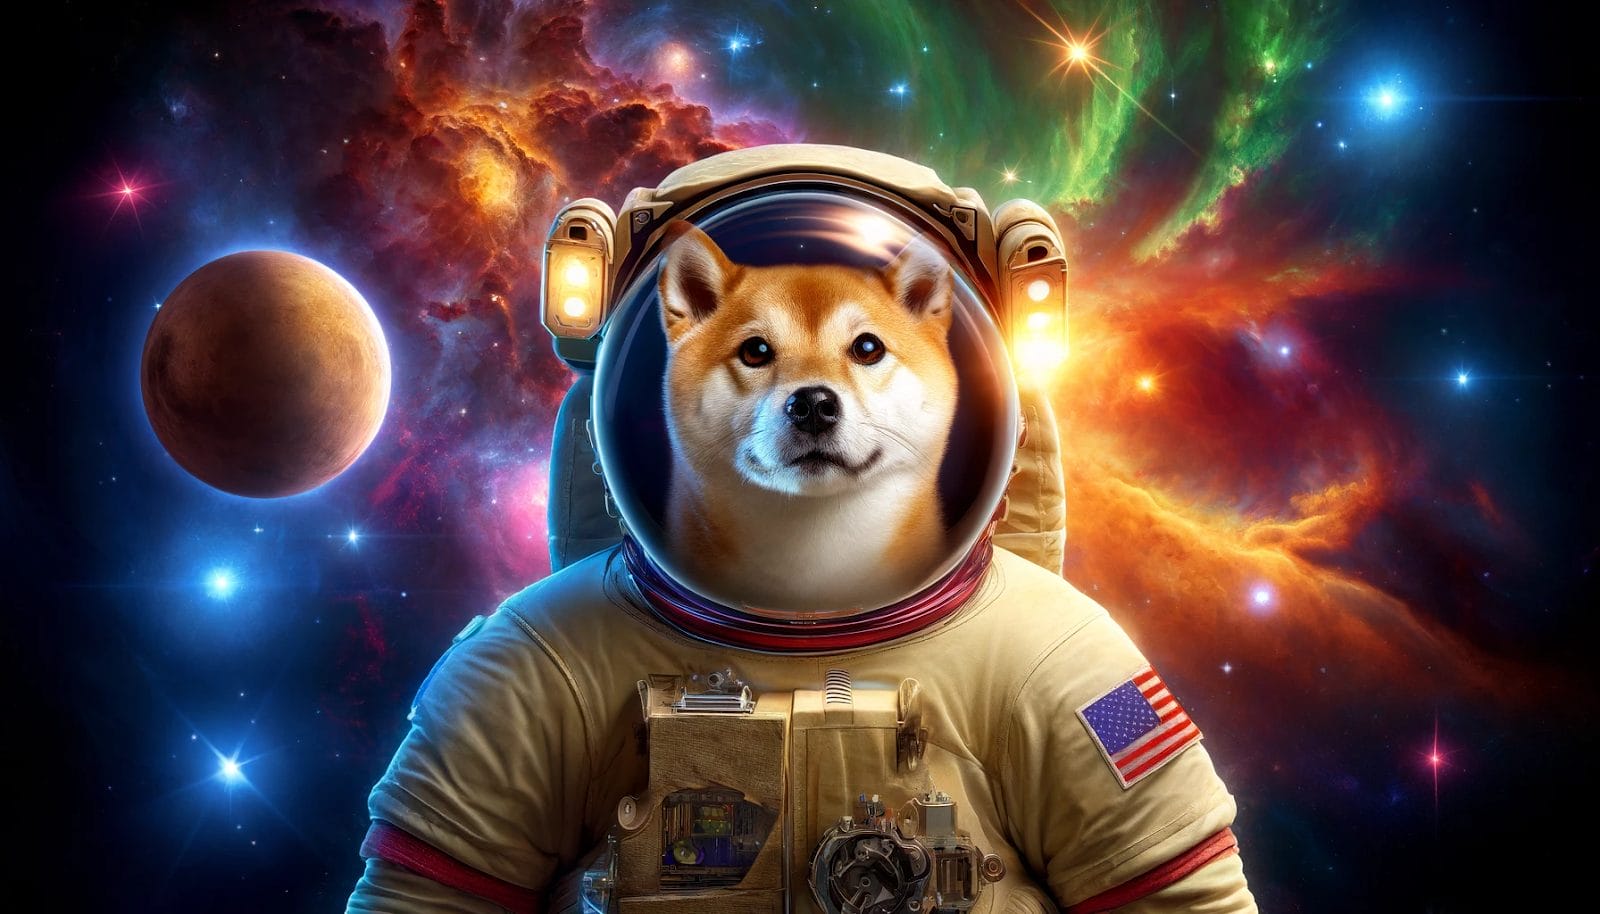 The DOGEVERSE presale shocked meme coin presale markets; with a jaw-dropping $15M raised, last chance to grab multichain dogcoin ahead of CEX